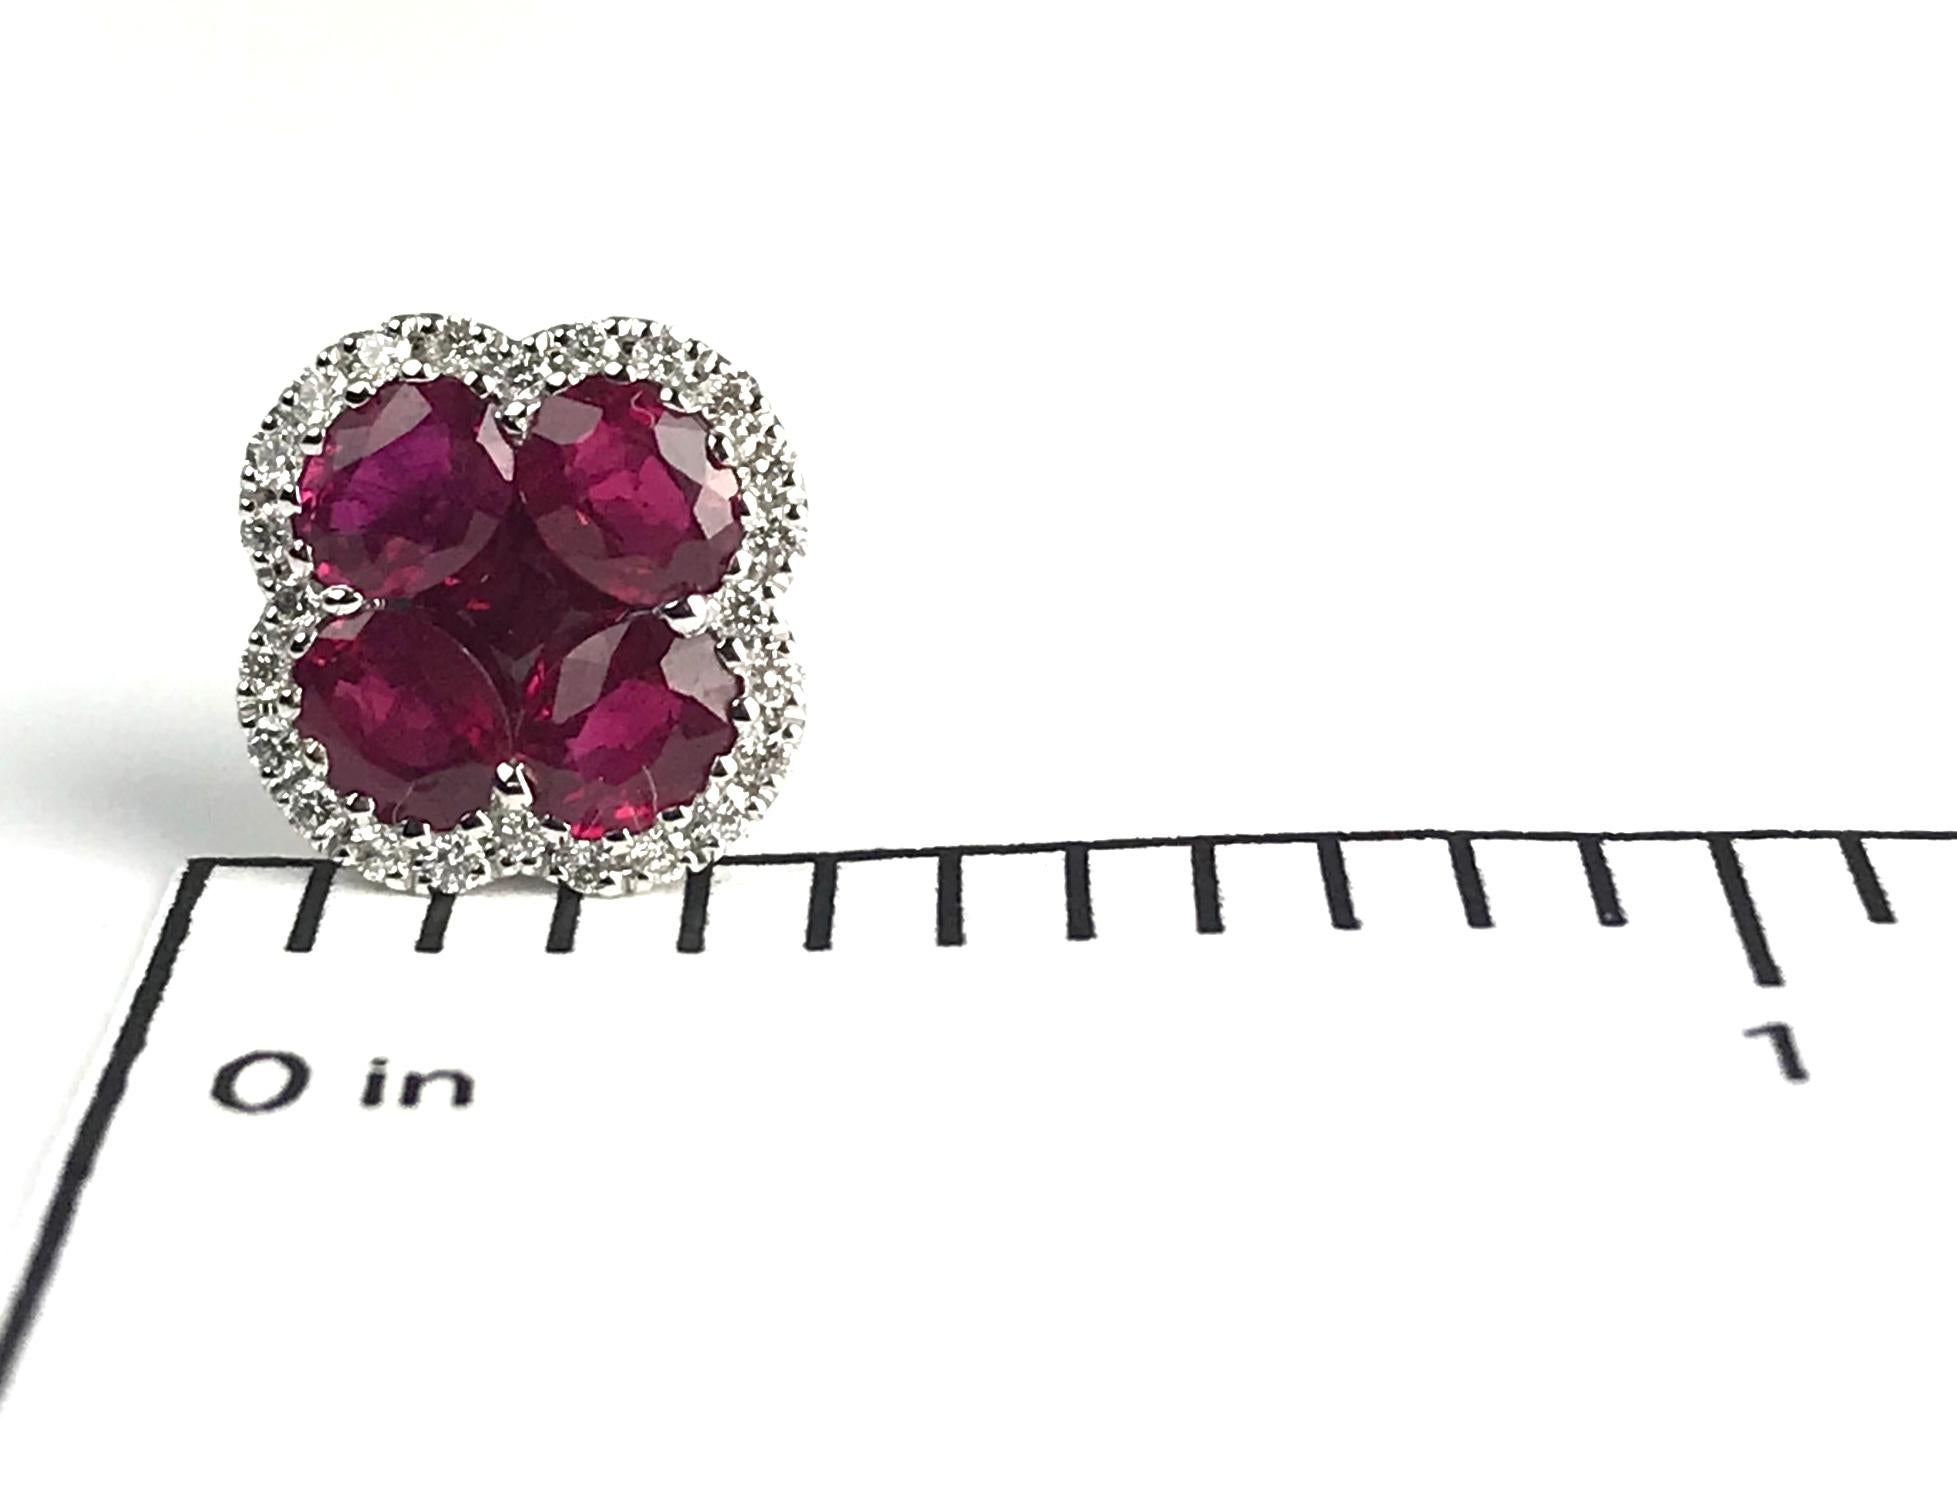 Contemporary 2.06 Carat Mixed Cut Ruby Clover Stud Earrings in 0.22 Ct Diamond Halo ref1501 For Sale